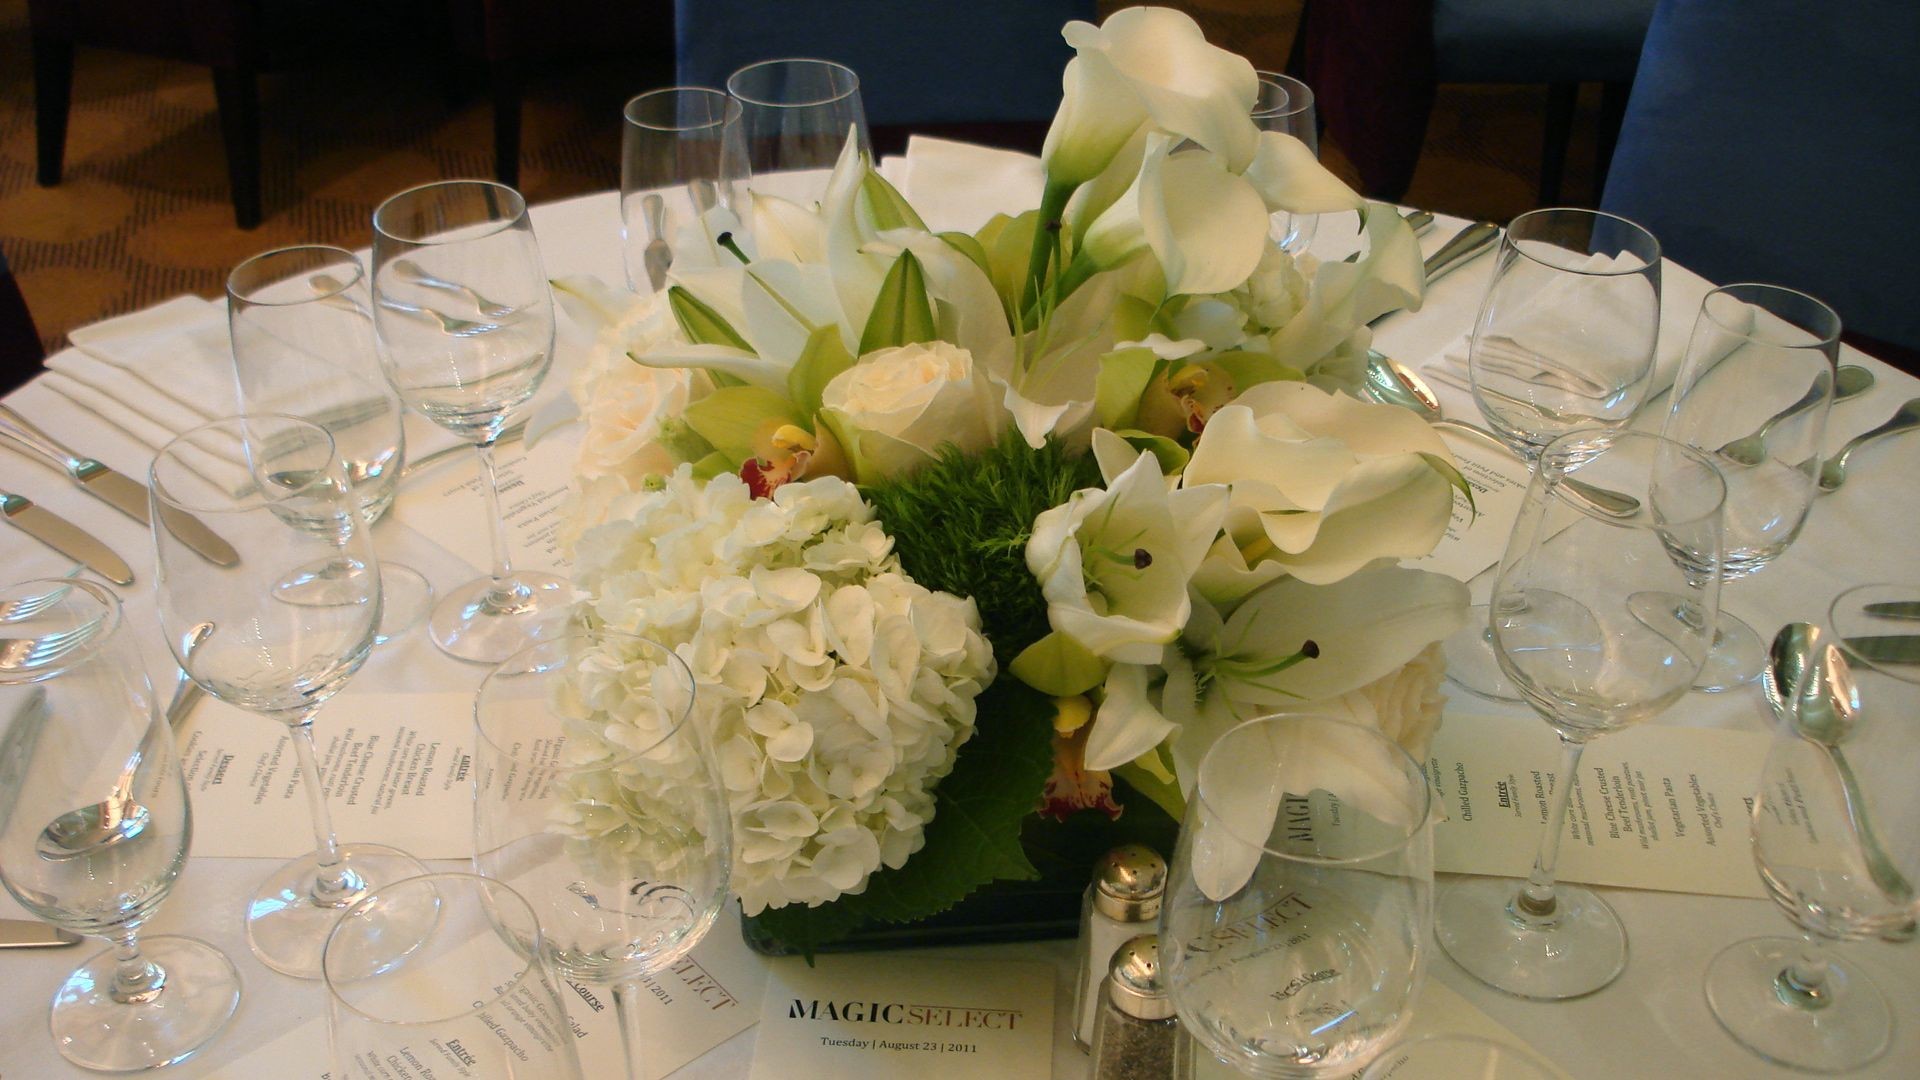 1920x1080 white easter lily centerpiece with hydrangea, cala lilies